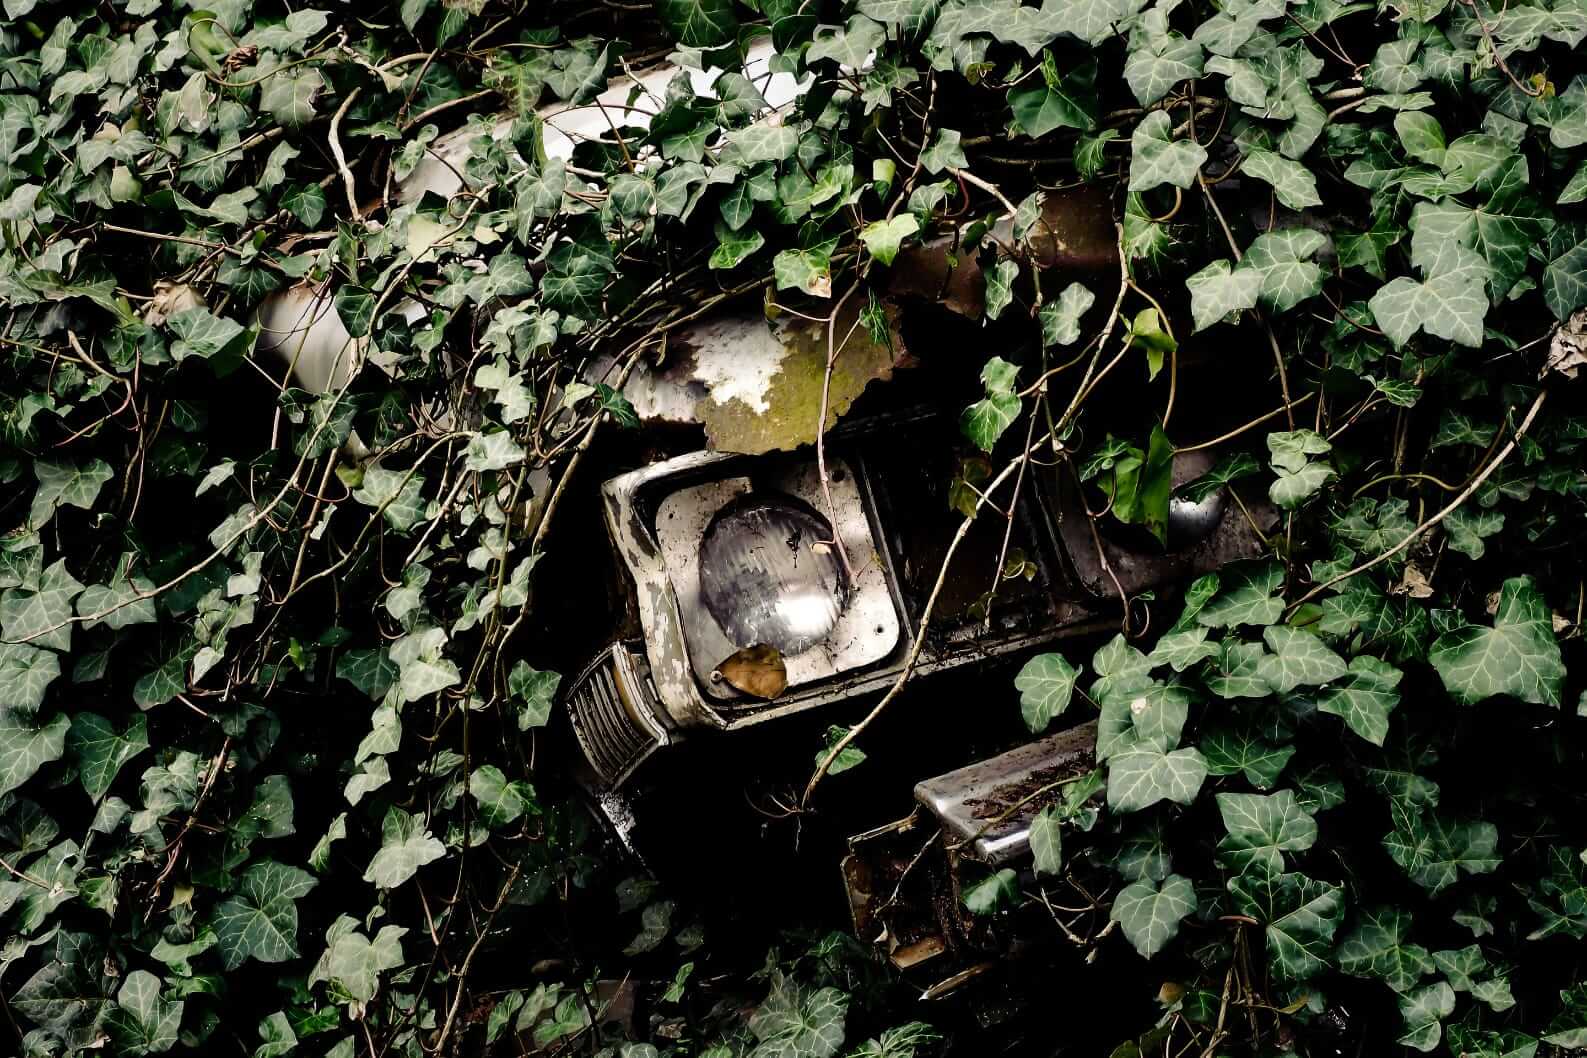 Photo of wrecked car headlight visible through a thick layer of cascading ivy